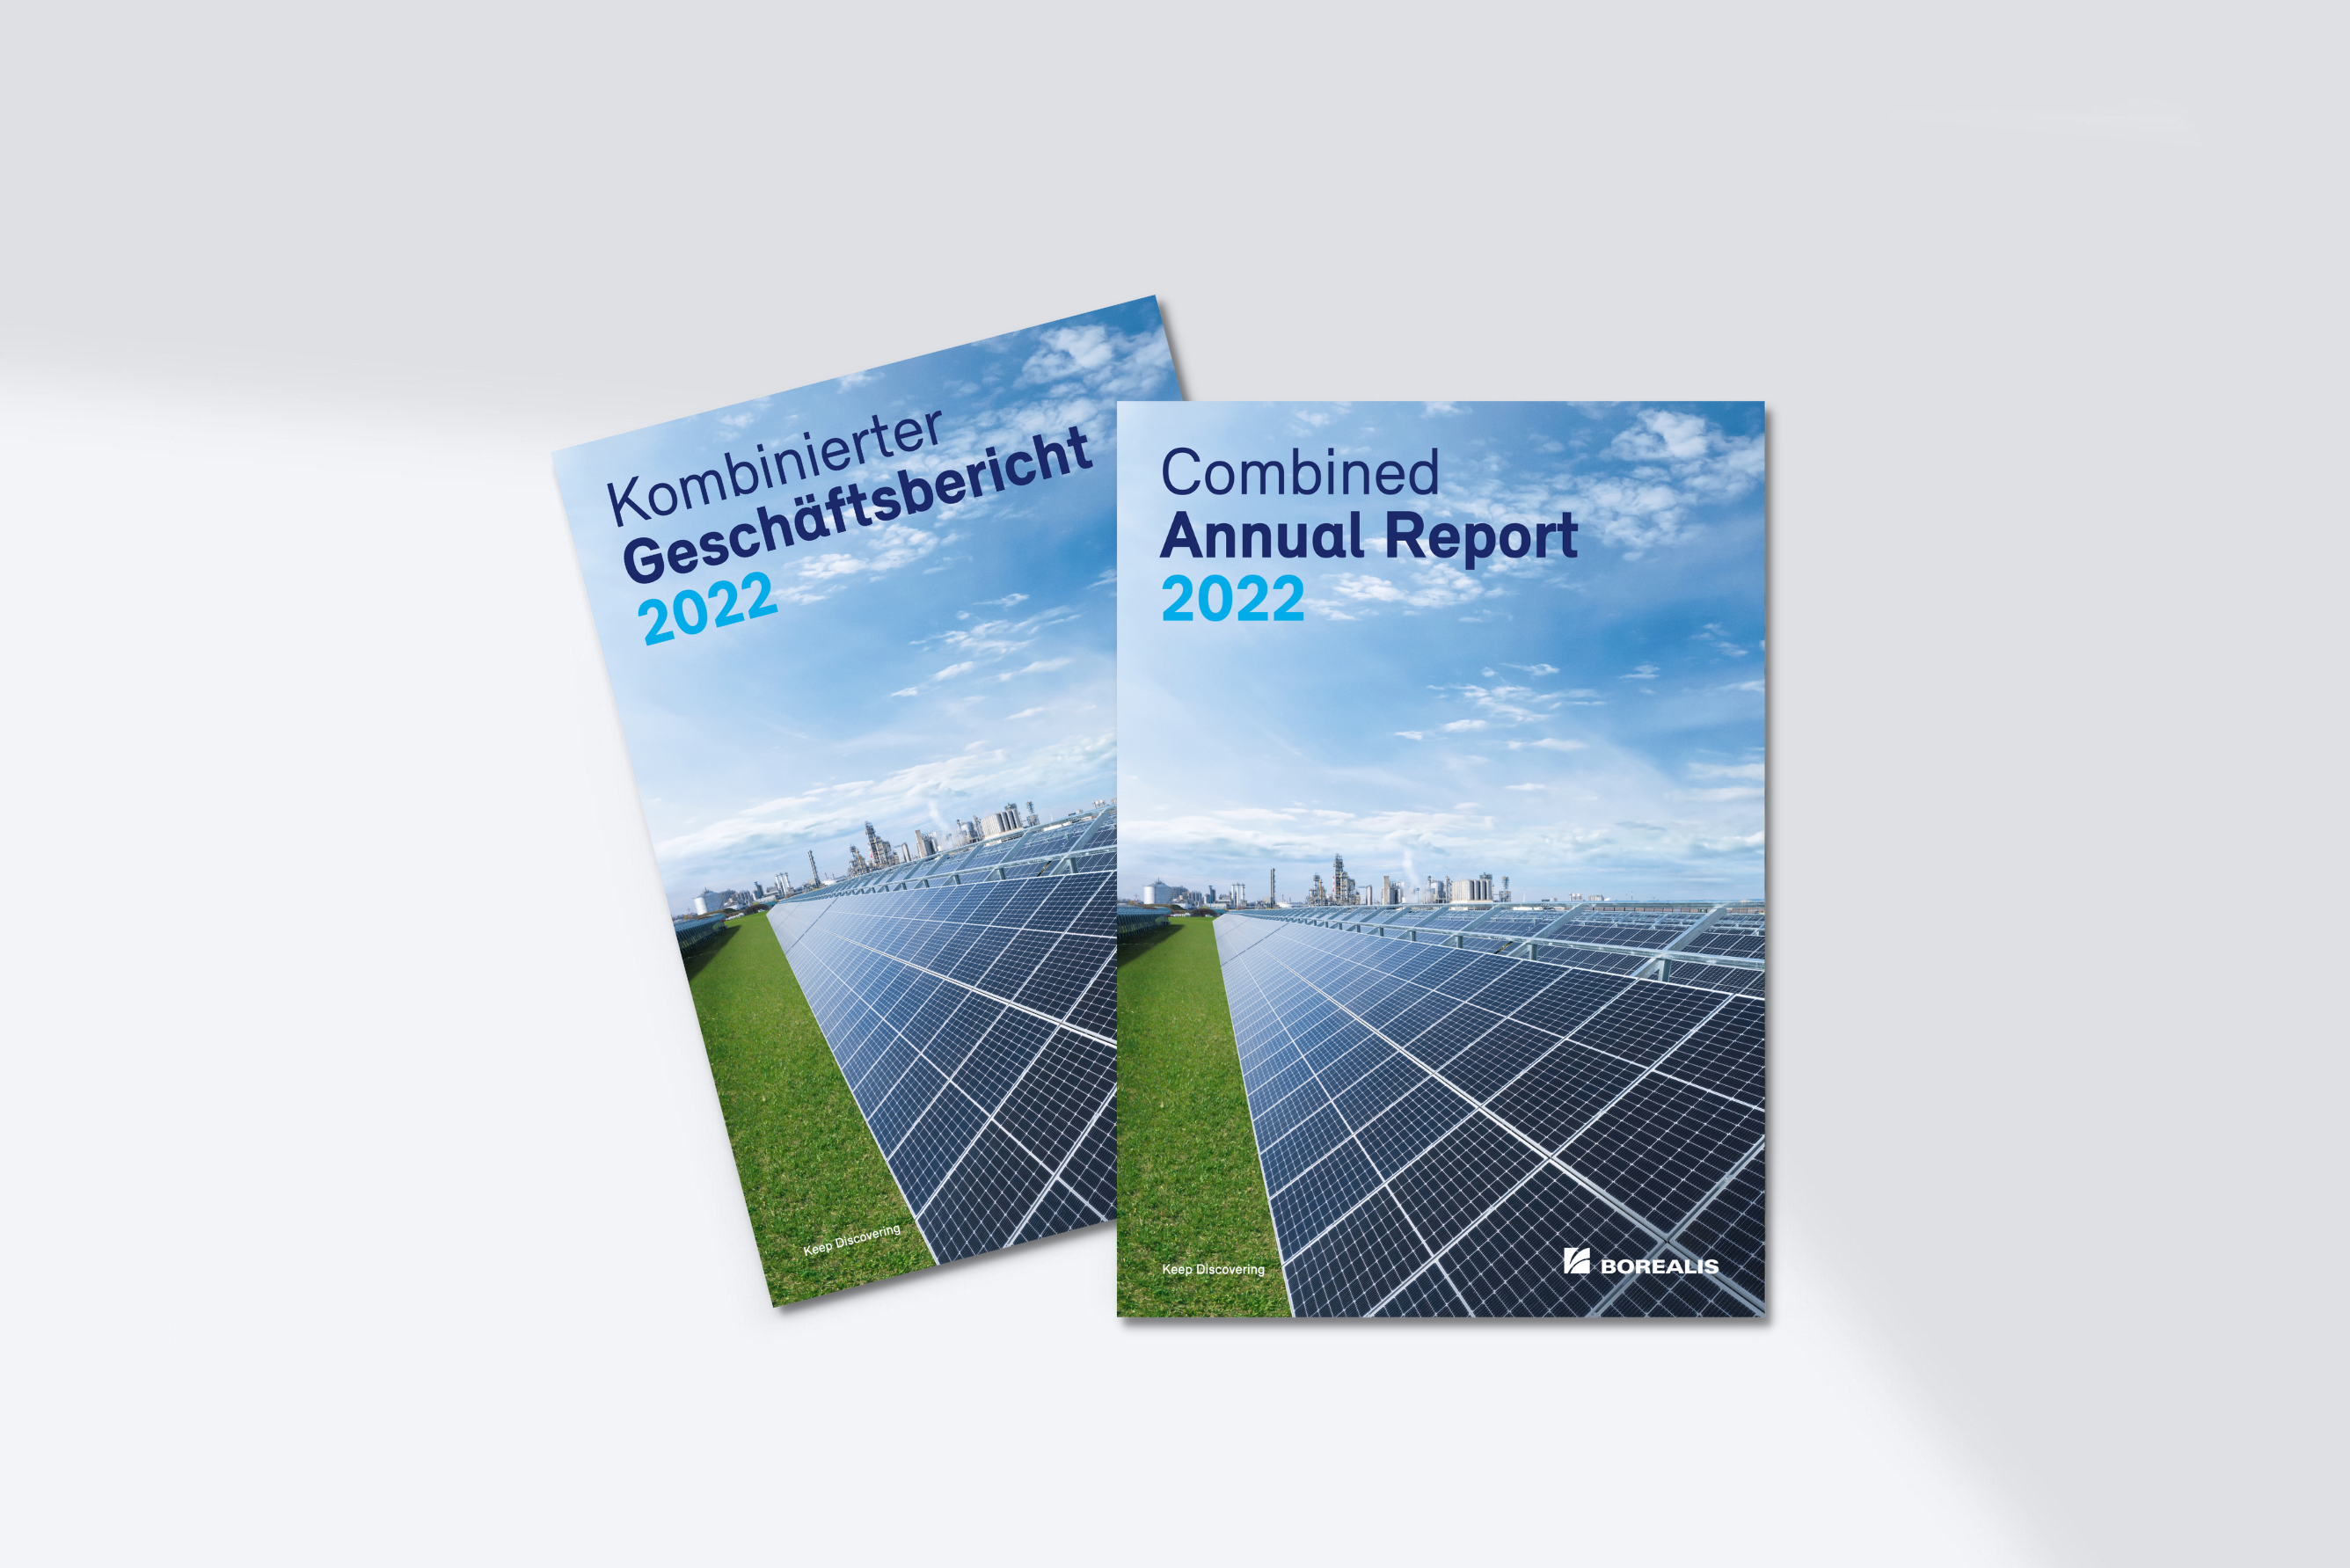 Annual Report 2022 covers